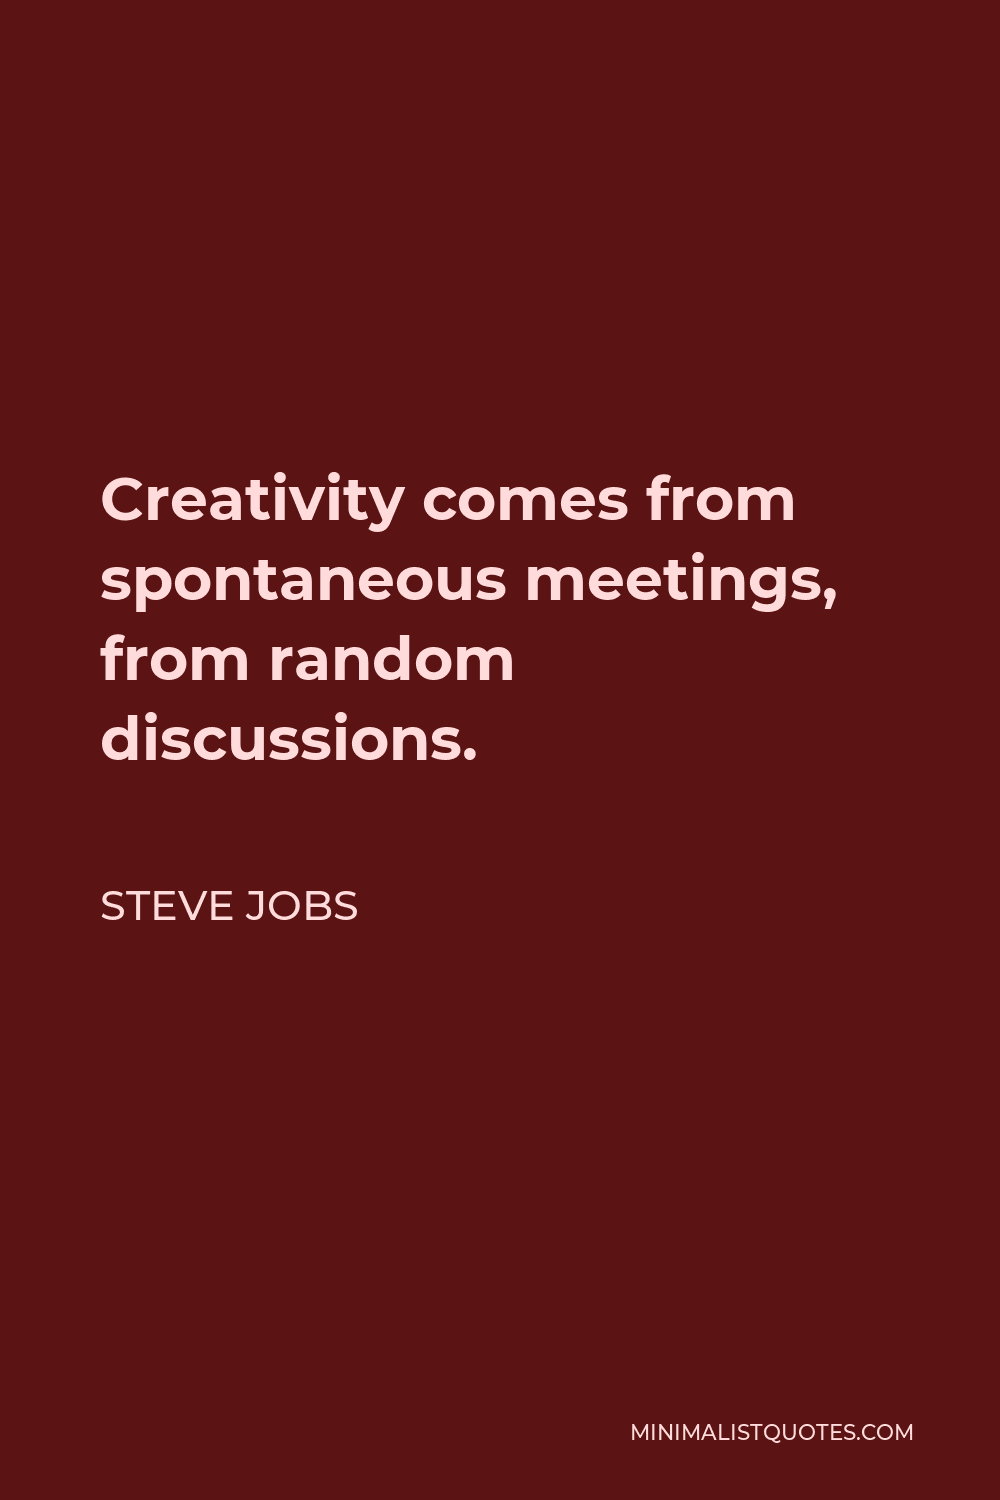 Steve Jobs Quote - Creativity comes from spontaneous meetings, from random discussions.